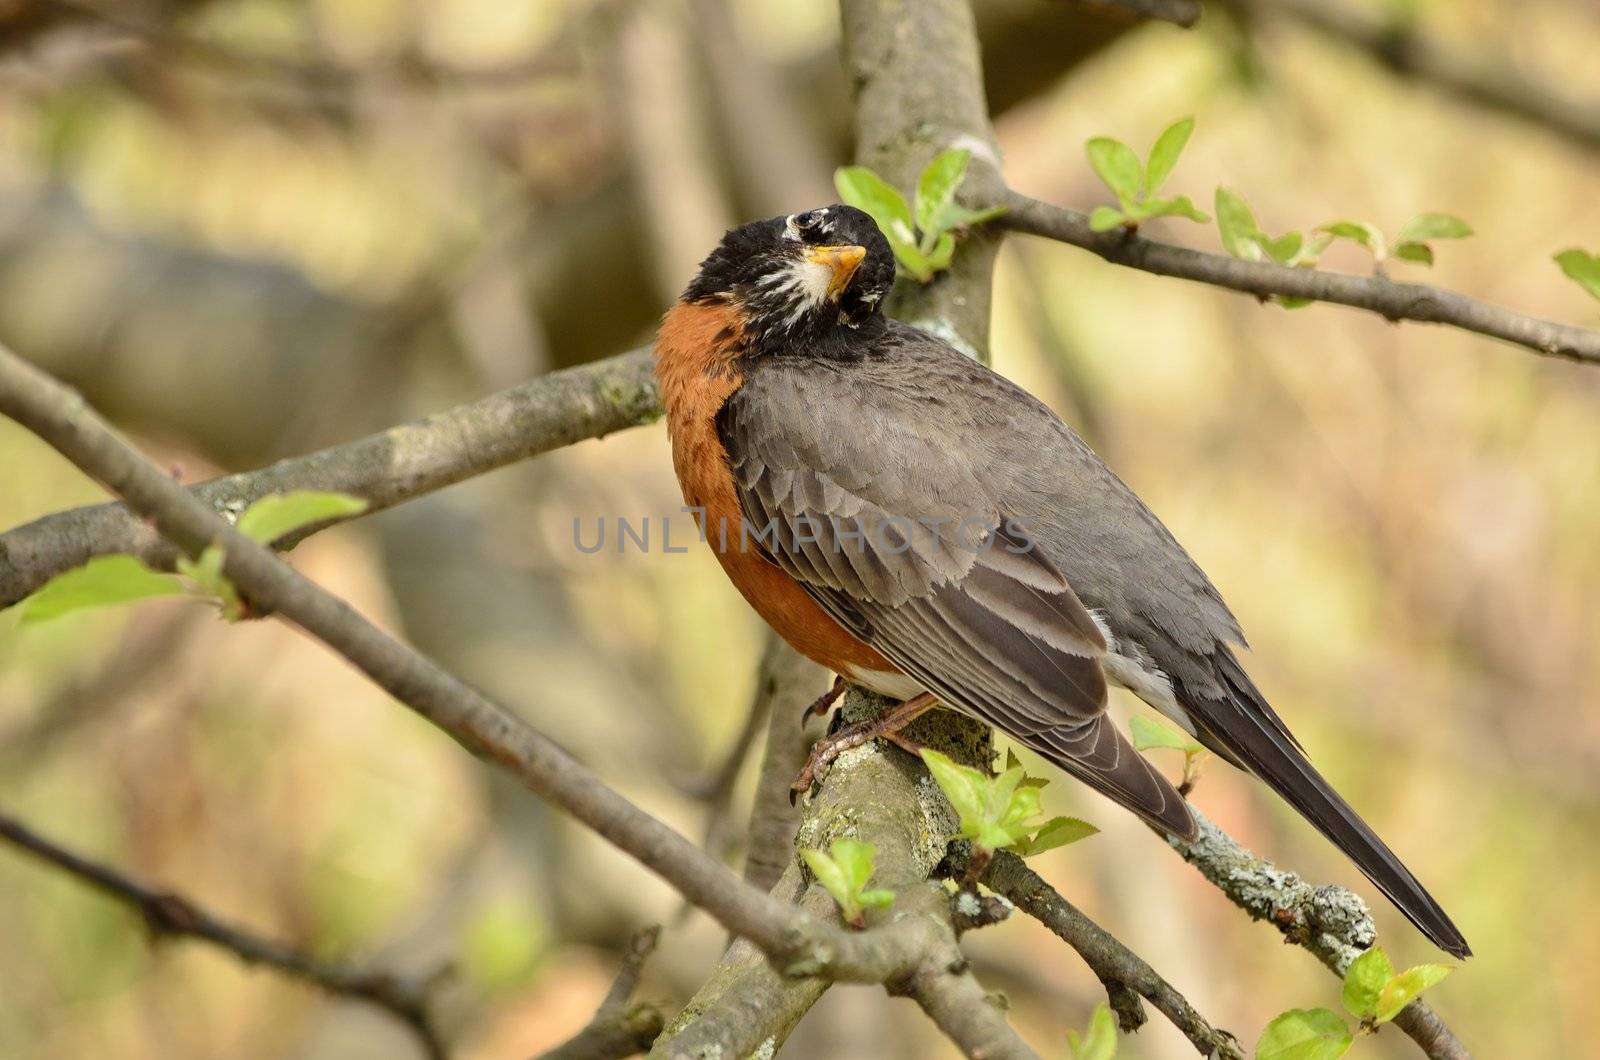 American Robin perched on a tree branch.